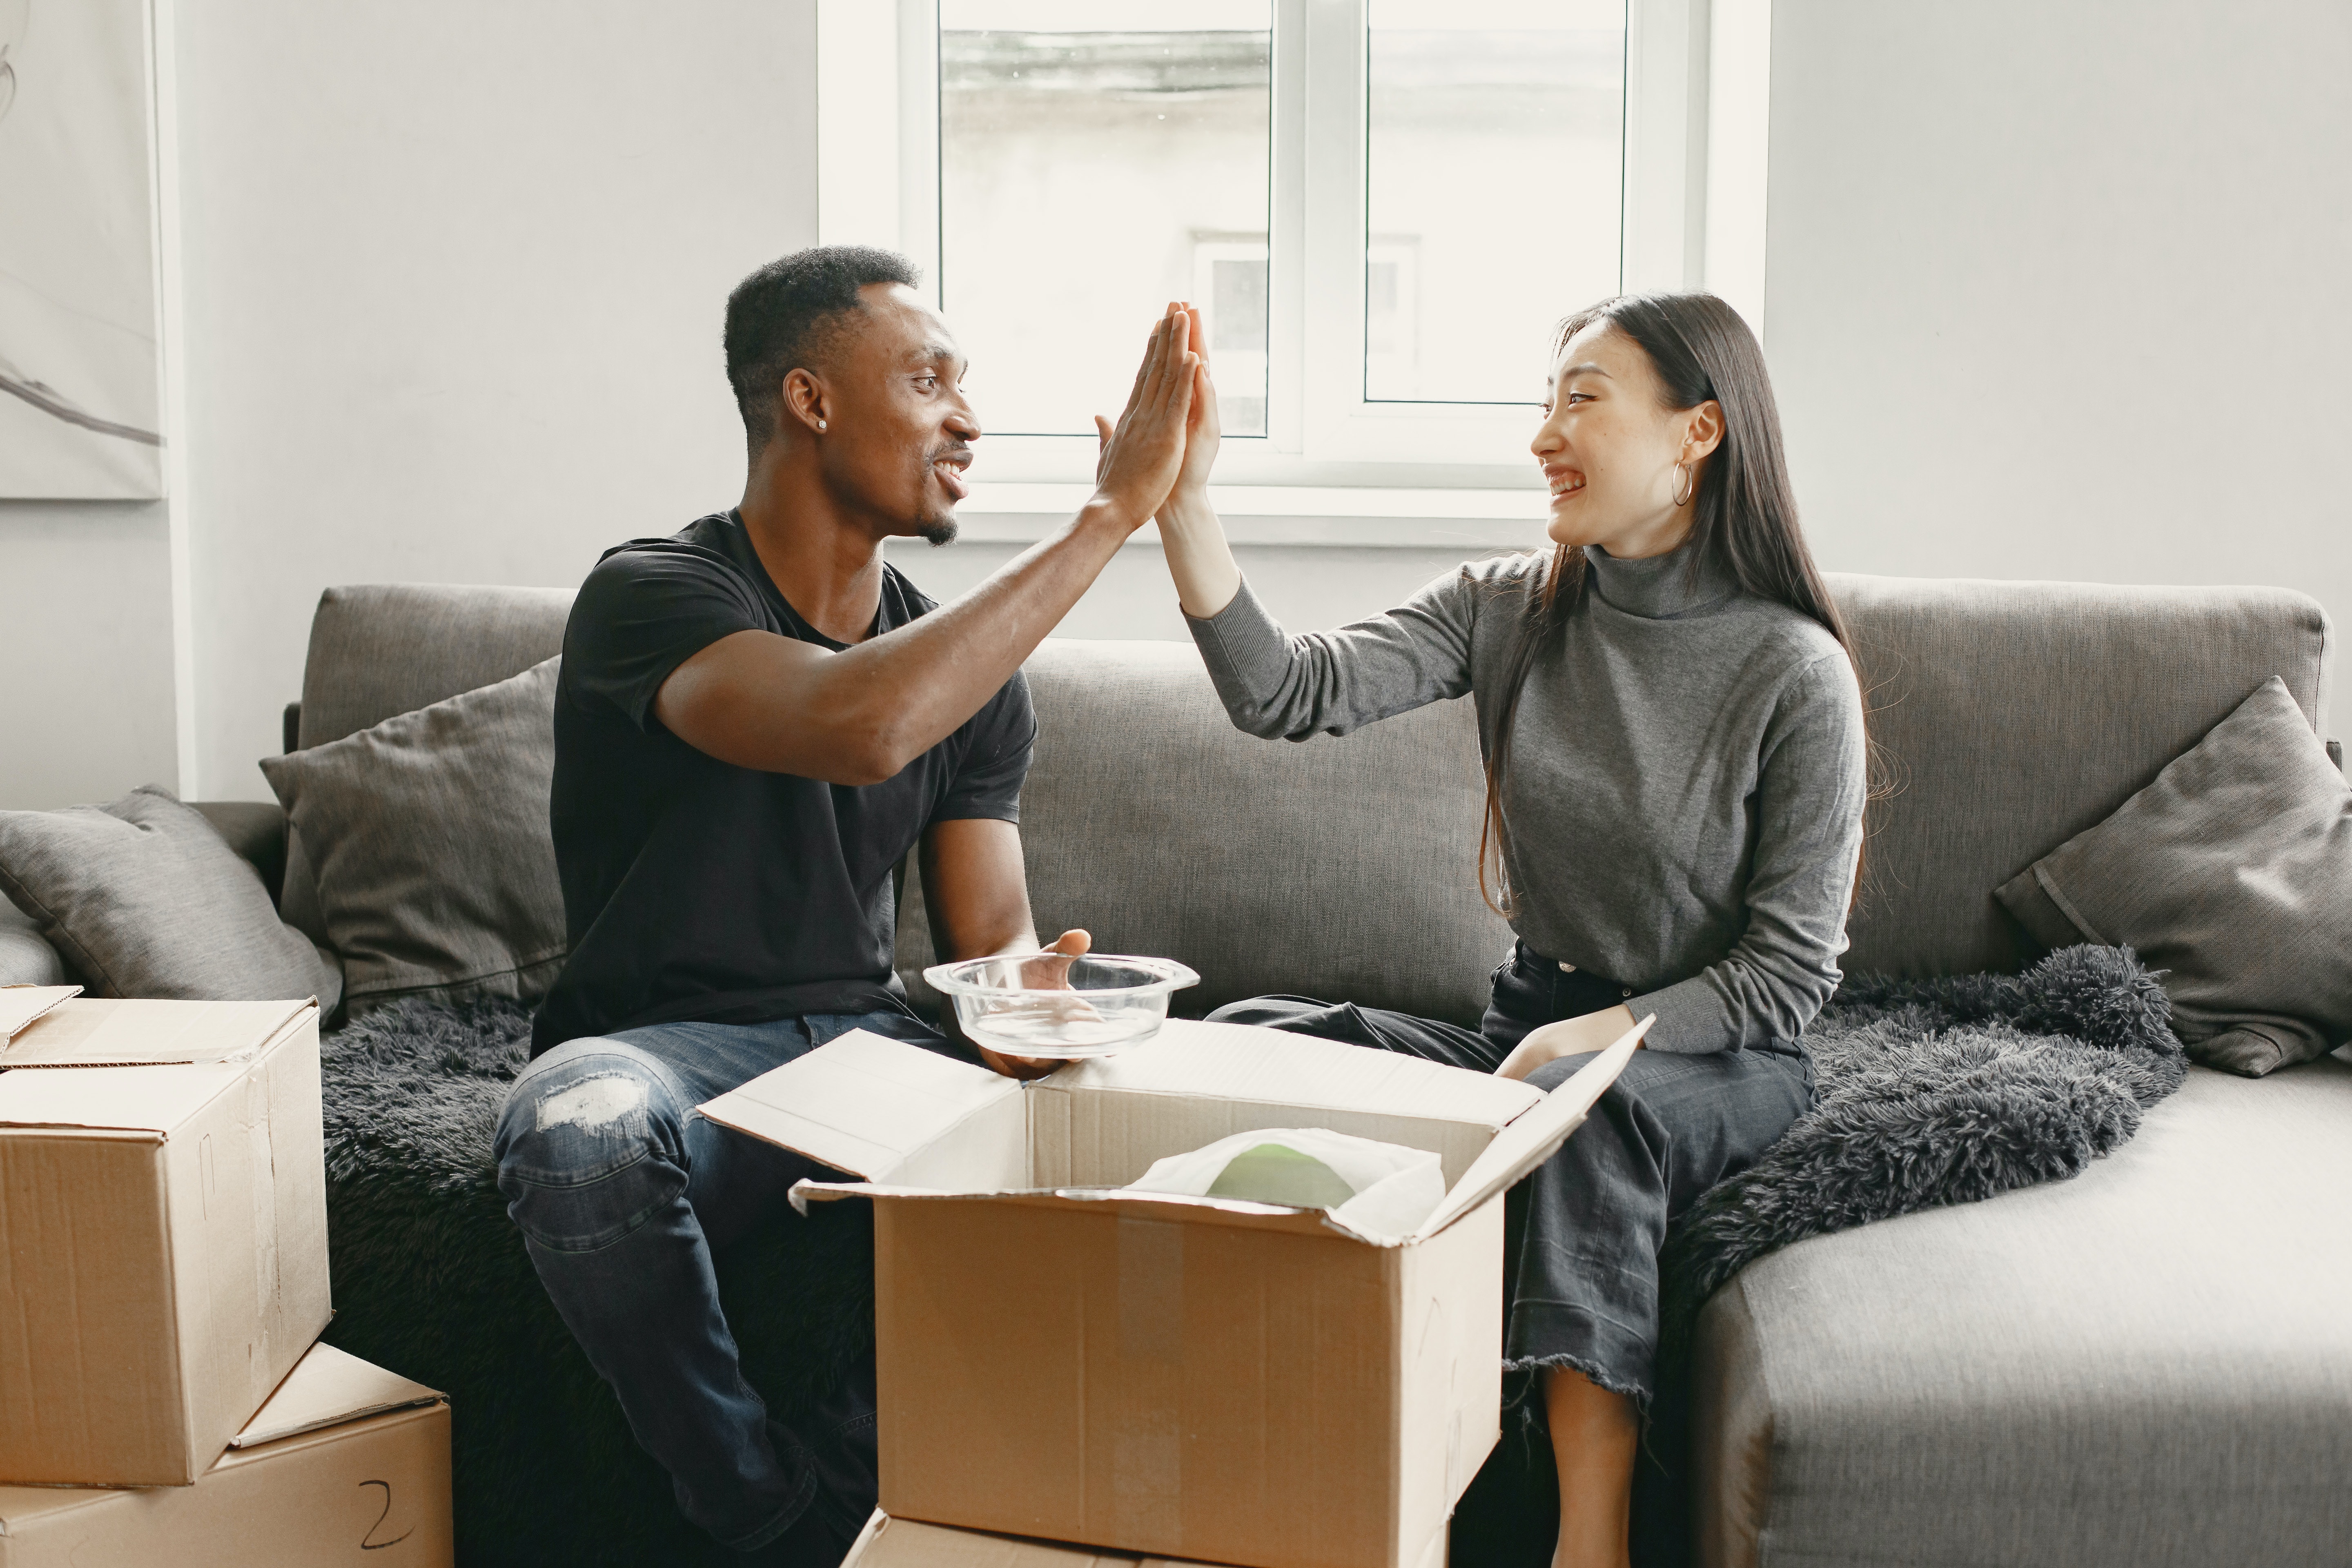 moving, couple moving, high five, moving boxes
Photo by Gustavo Fring: https://www.pexels.com/photo/man-and-woman-sitting-on-couch-unpacking-boxes-7489125/
